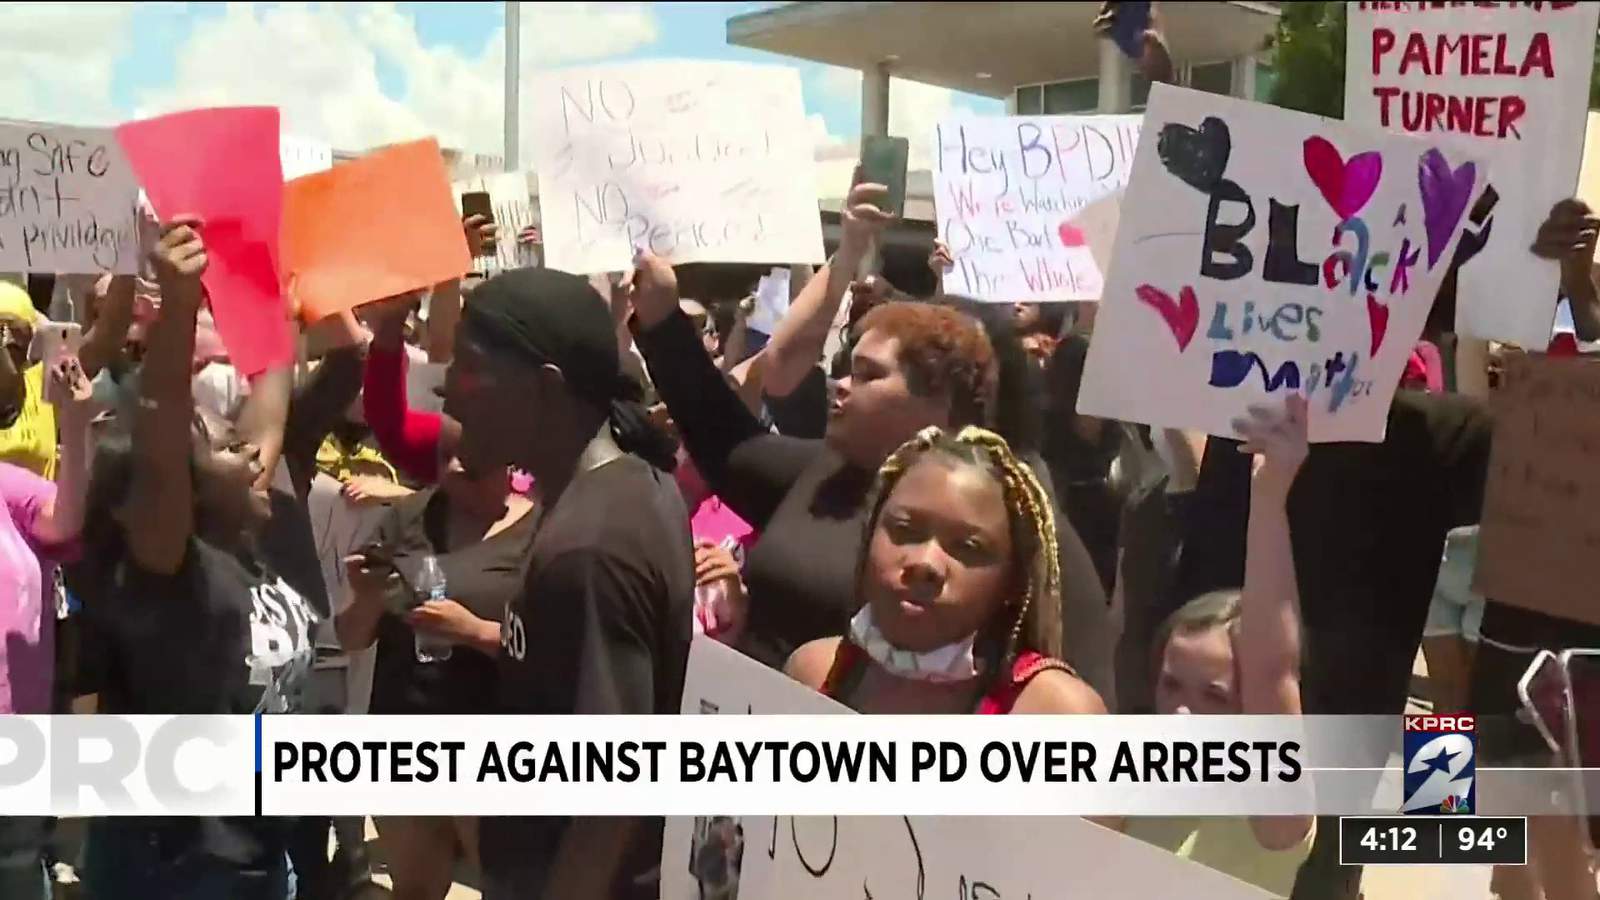 Dozens gather in Baytown to protest controversial arrest caught on video, death of Pamela Turner